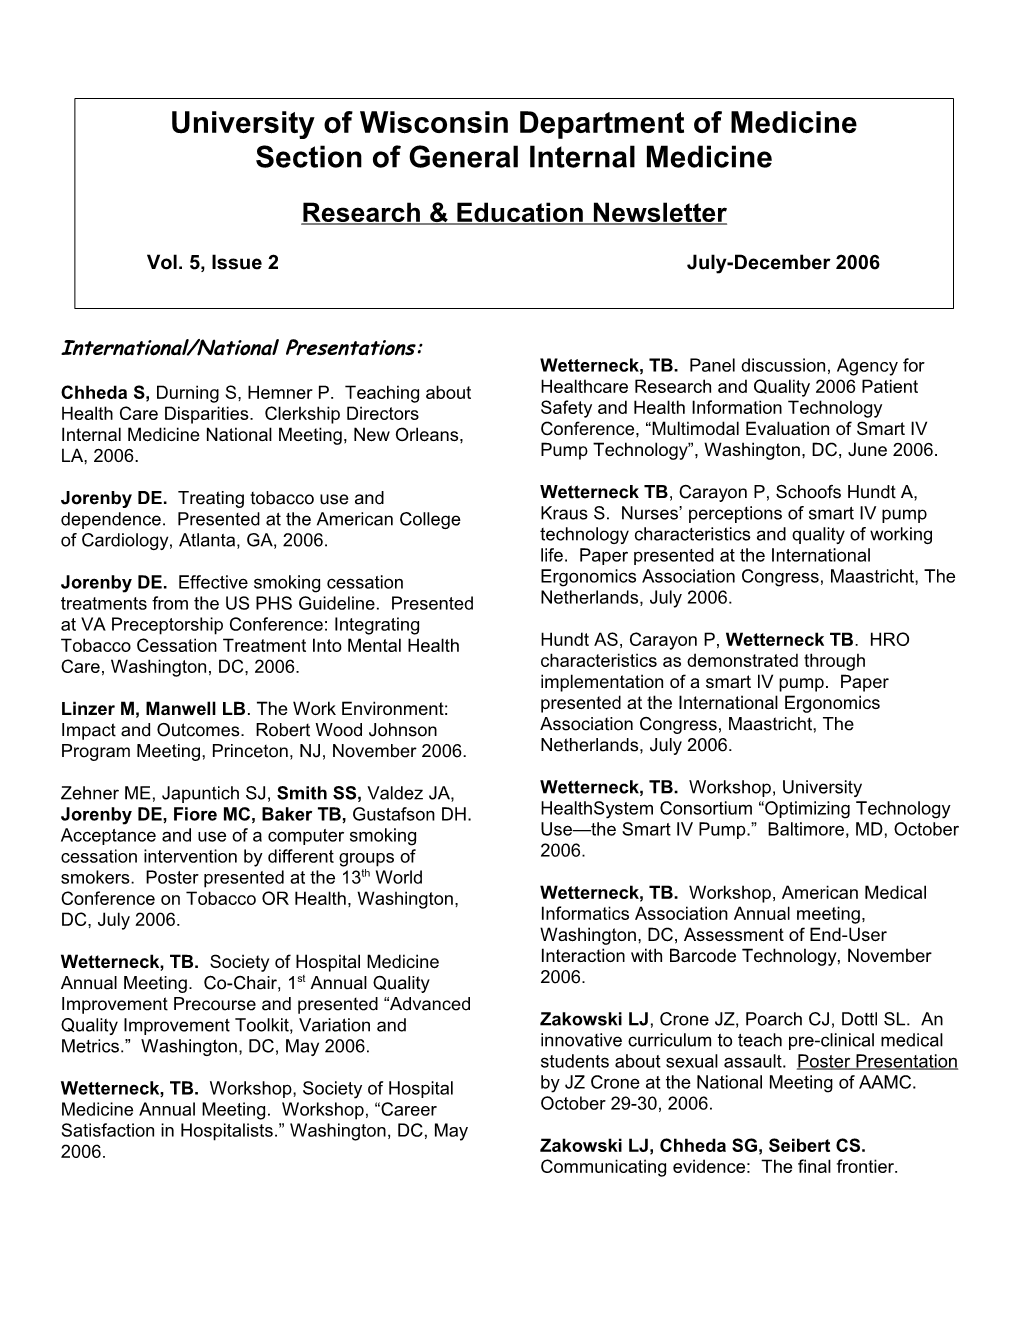 Research & Education Newsletter Page 4